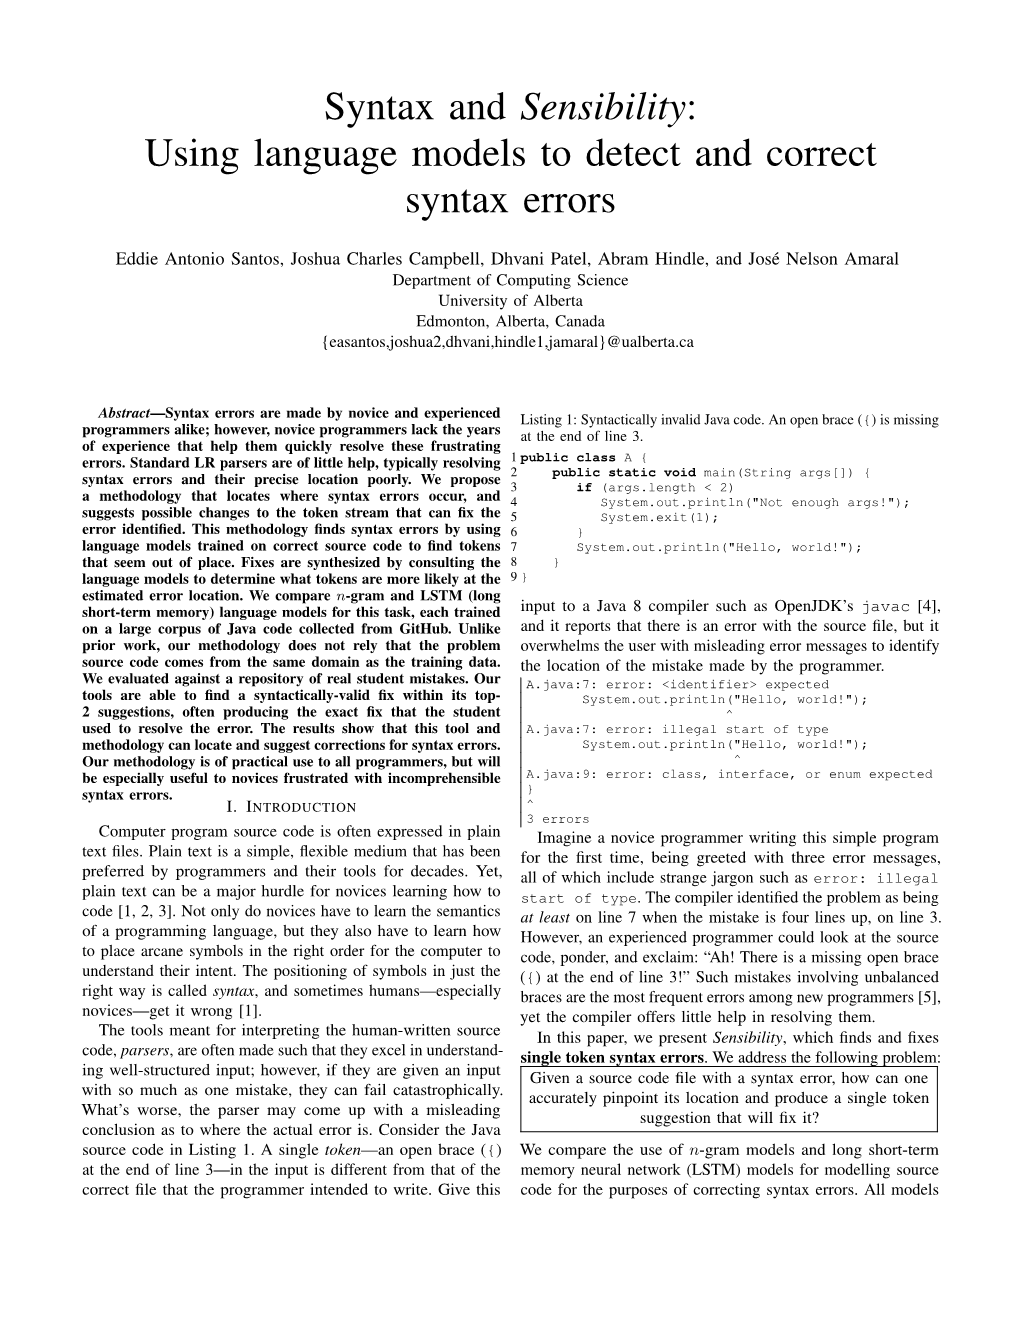 Using Language Models to Detect and Correct Syntax Errors